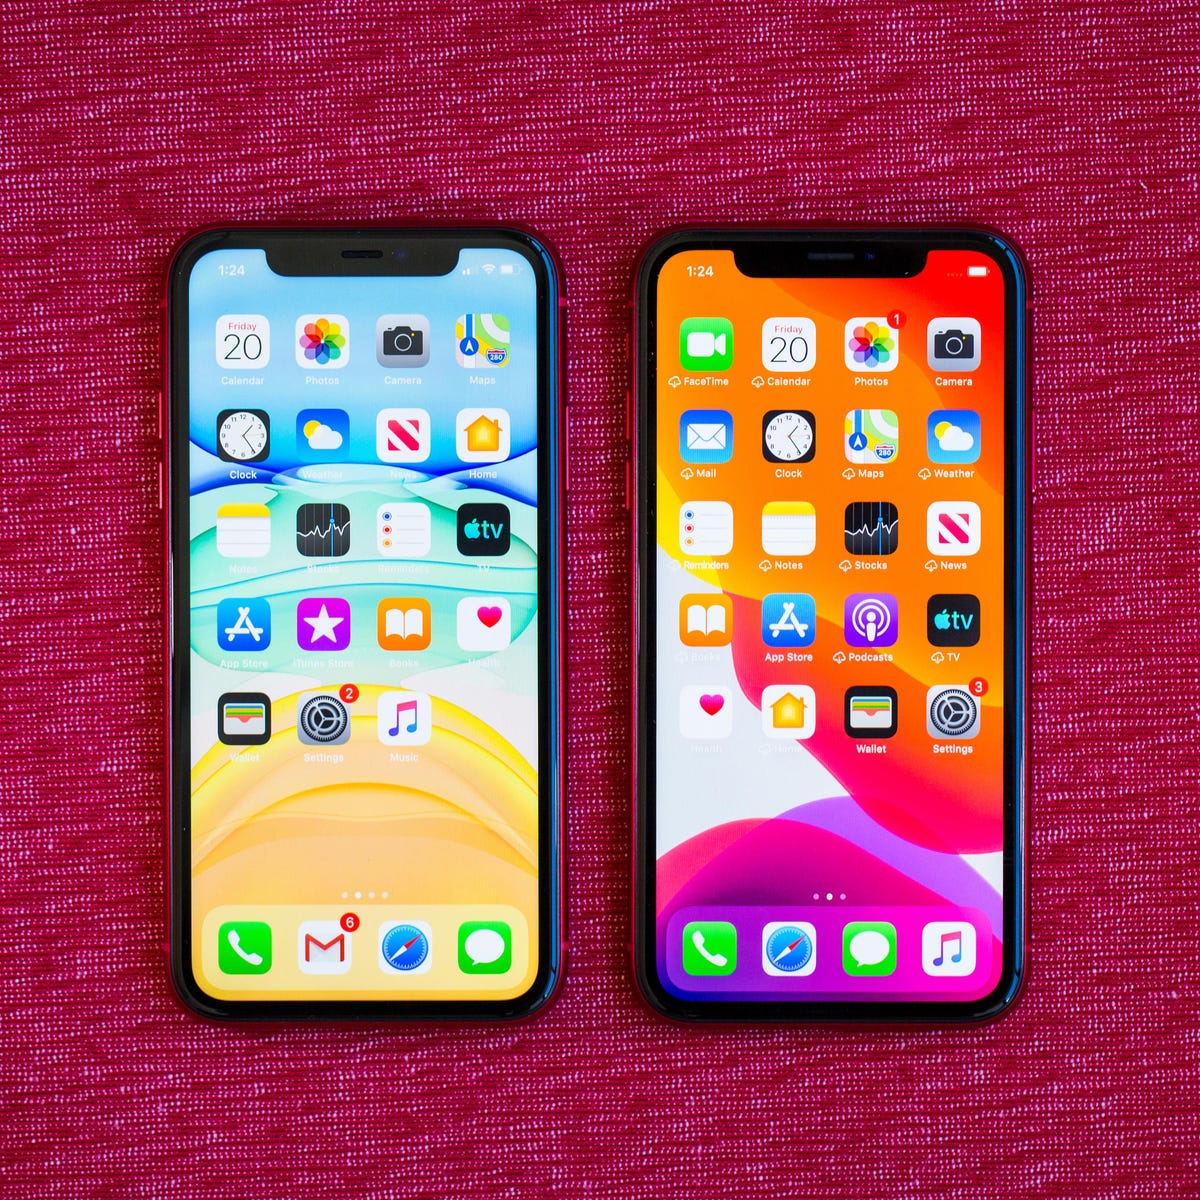 iPhone 11 vs. iPhone XR: Which is the best iPhone? - CNET